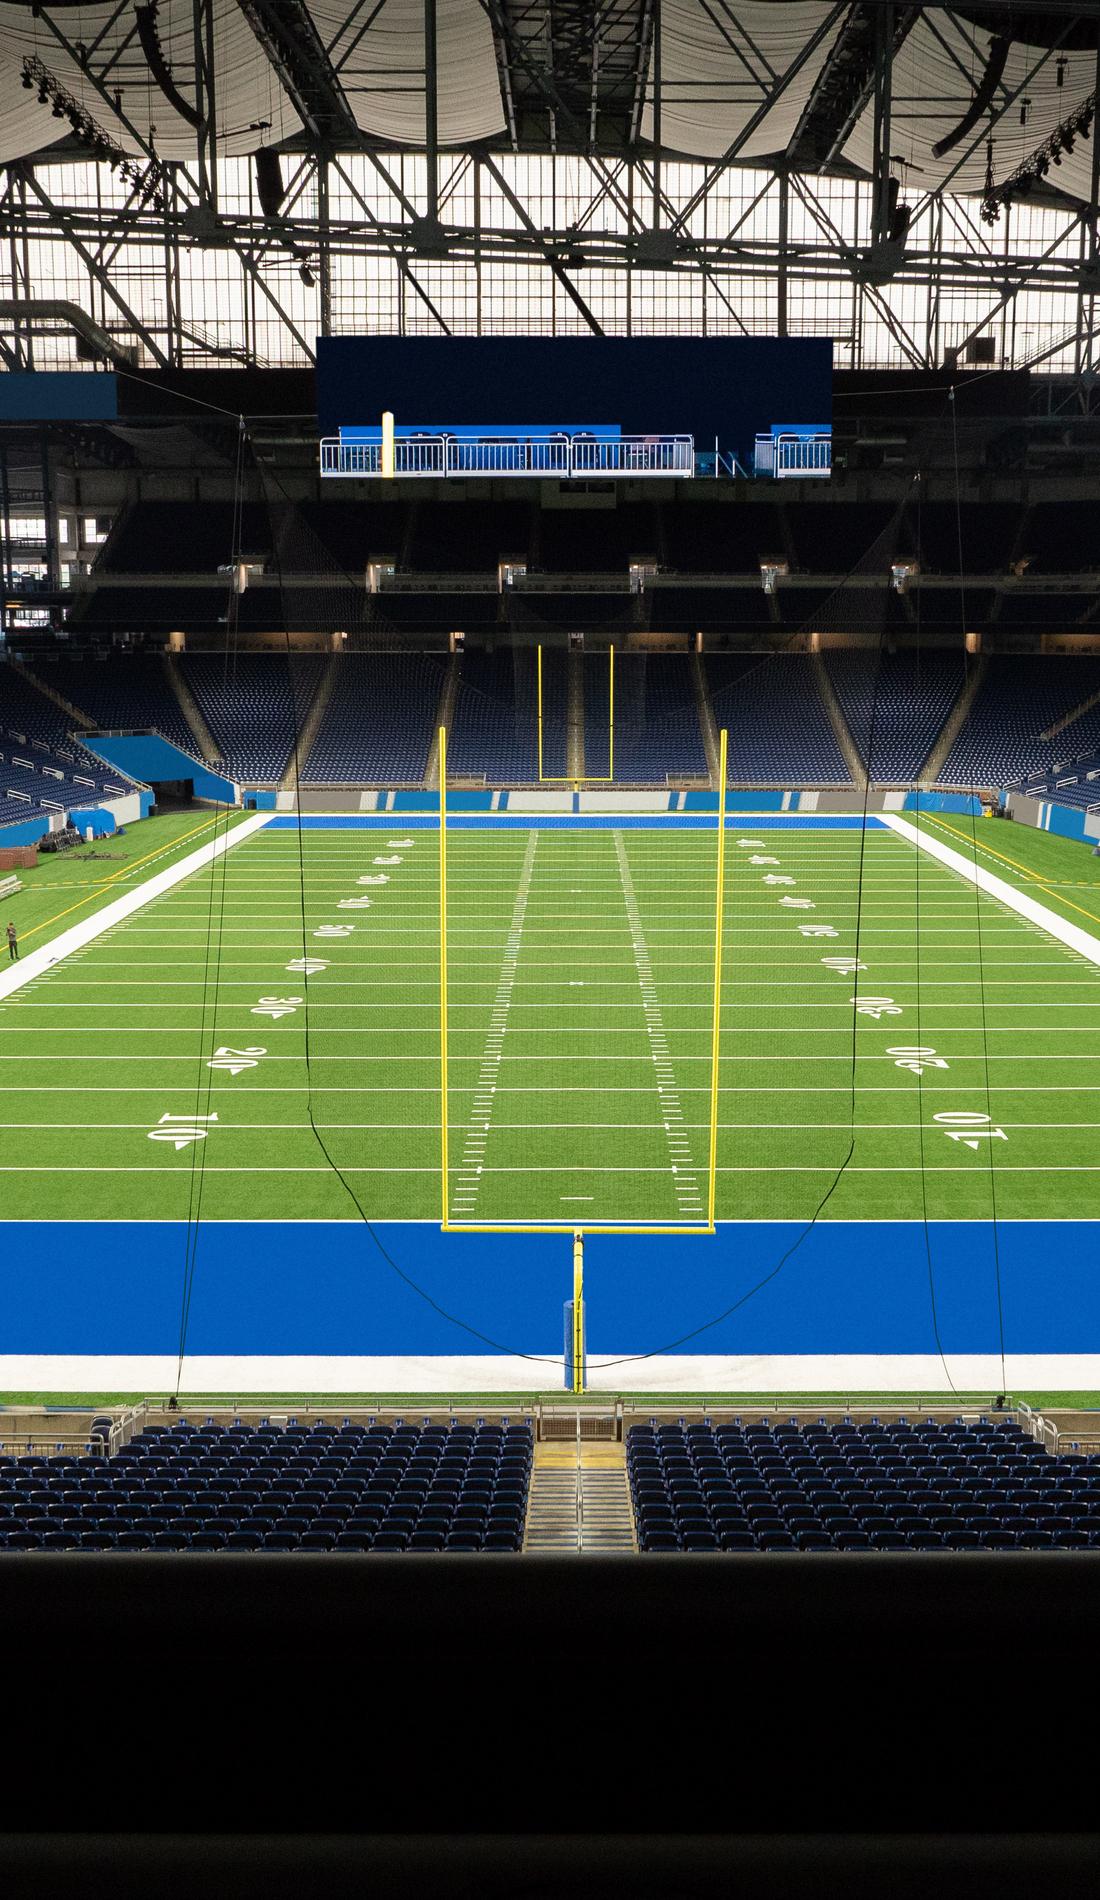 Buffalo Bills vs. Cleveland Browns at Ford Field: How to get tickets